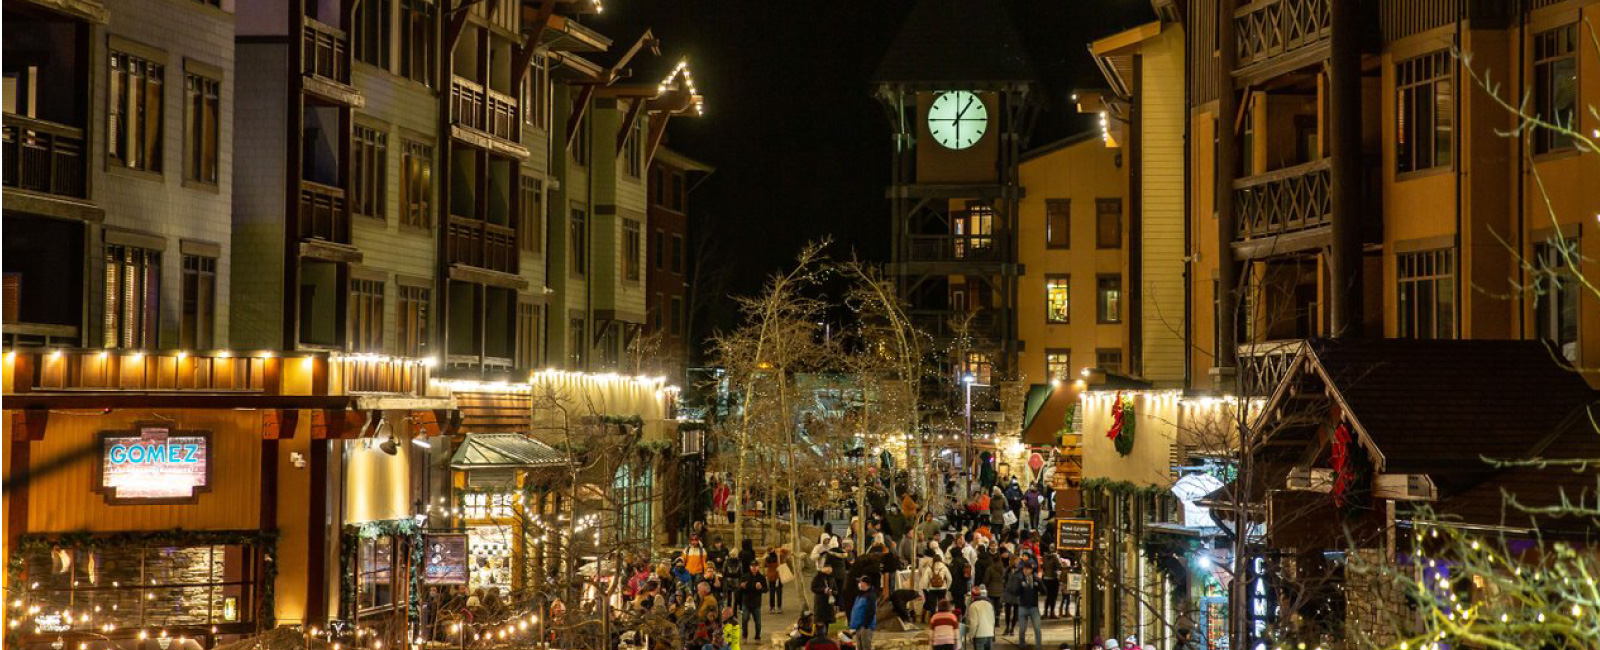 Mammoth Lakes town in winter at night